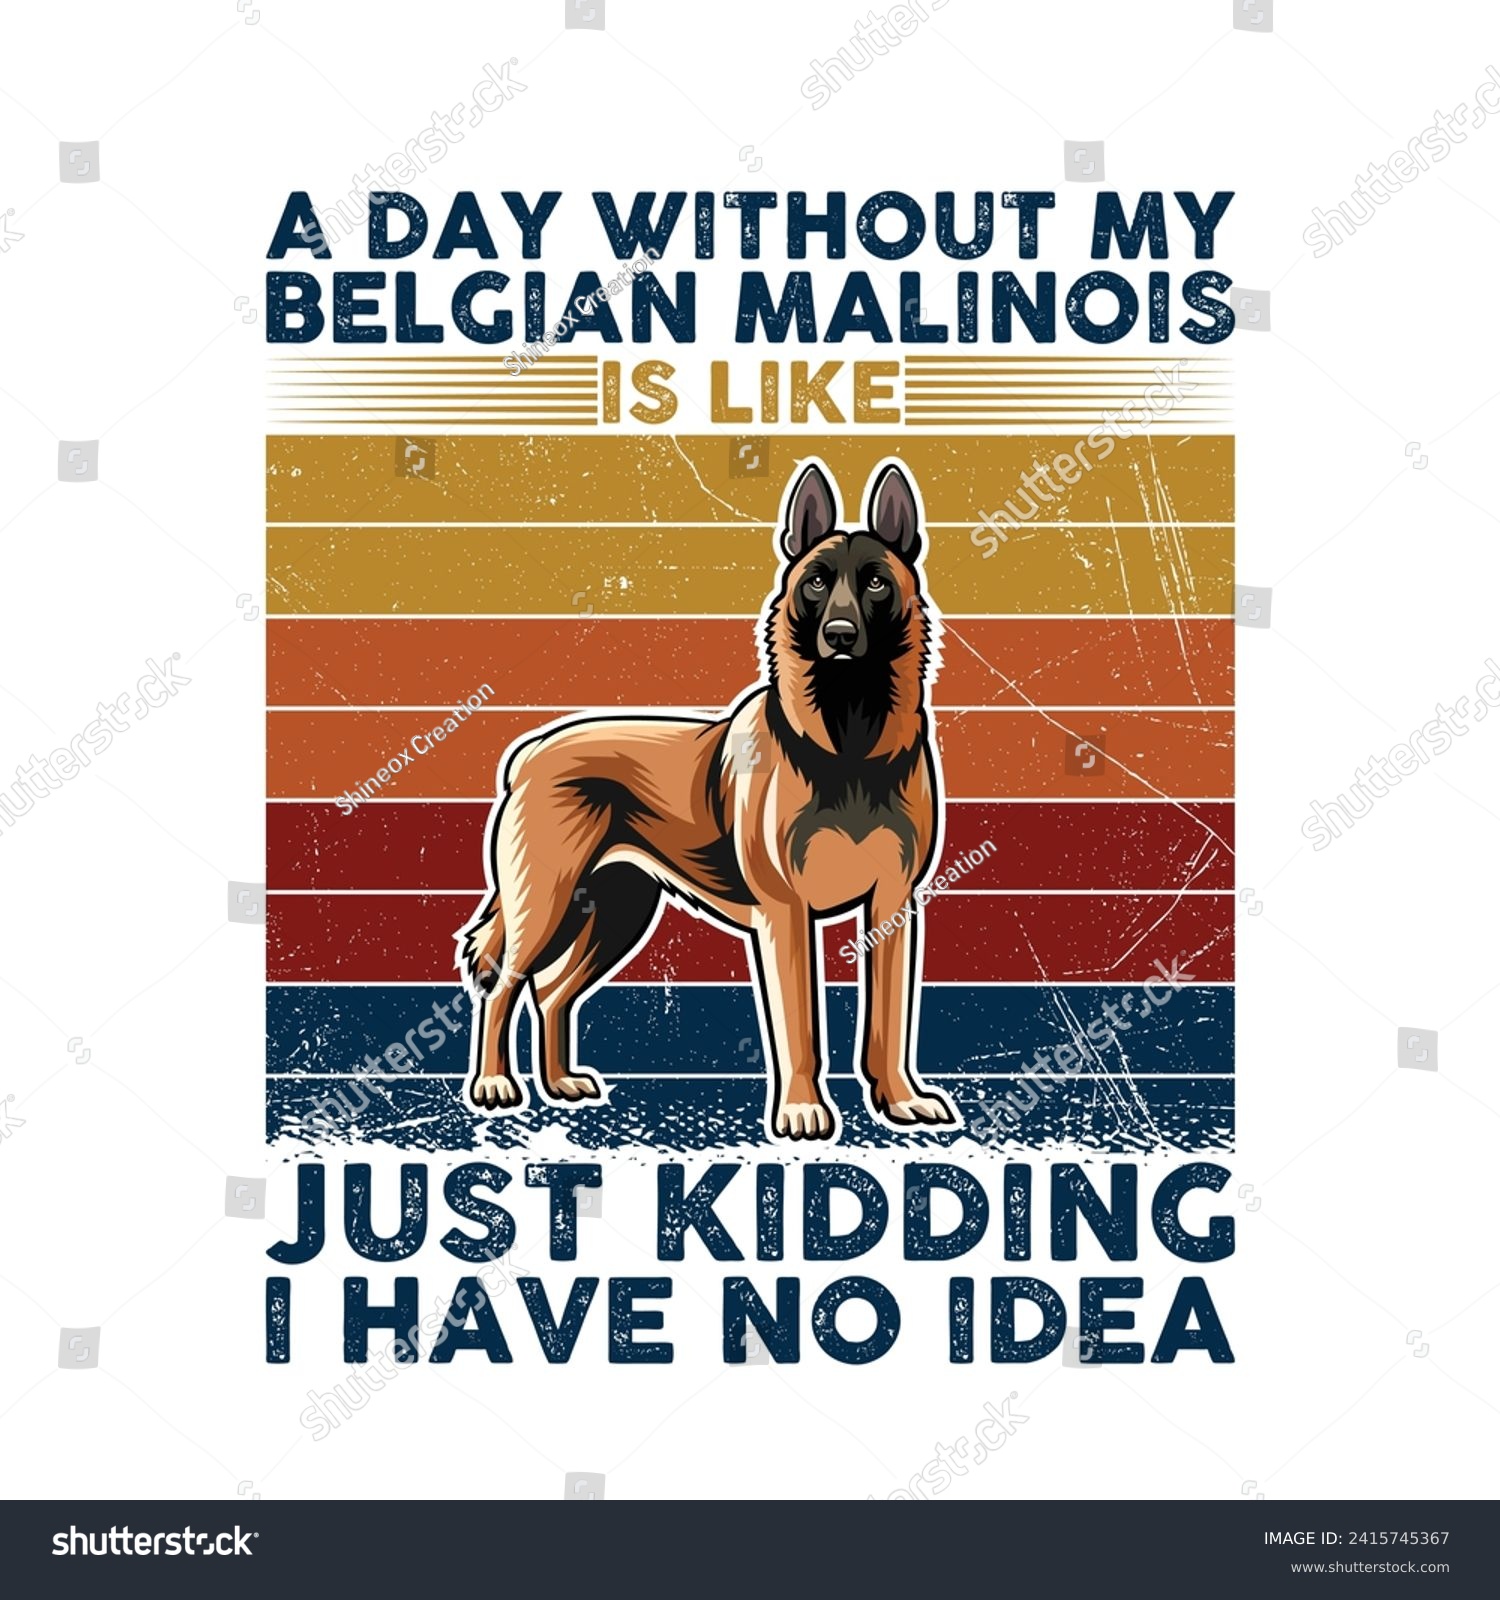 SVG of A Day Without My Belgian Malinois is like just kidding i have no idea - Typography Retro T-shirt Design. This versatile design is ideal for prints, t-shirts, mugs, posters, and many other tasks. svg